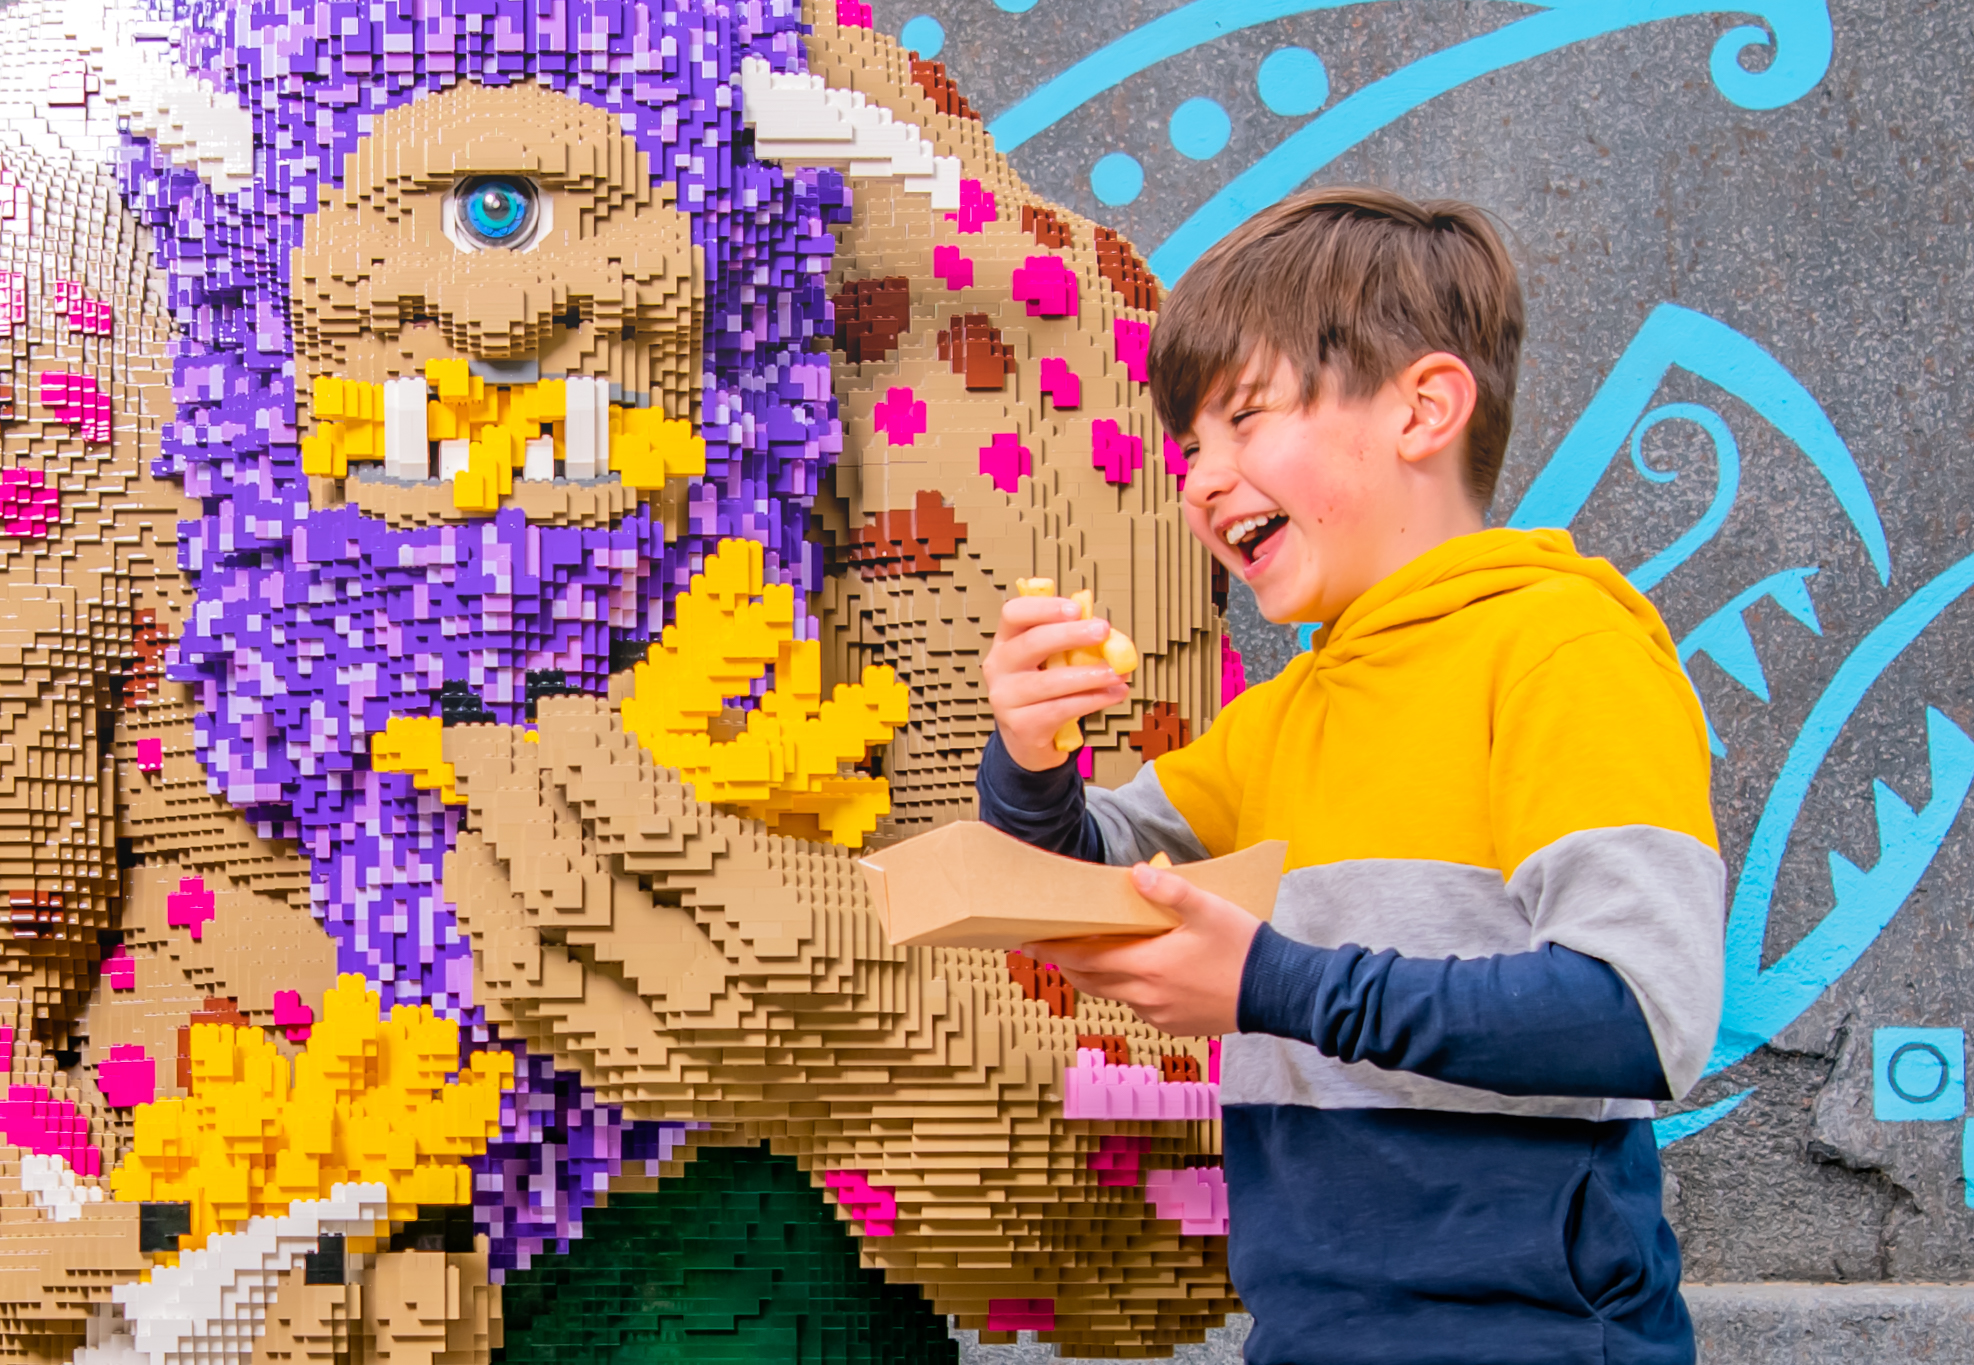 Child enjoying Chips next to LEGO® Troll at The Hungry Troll restaurant